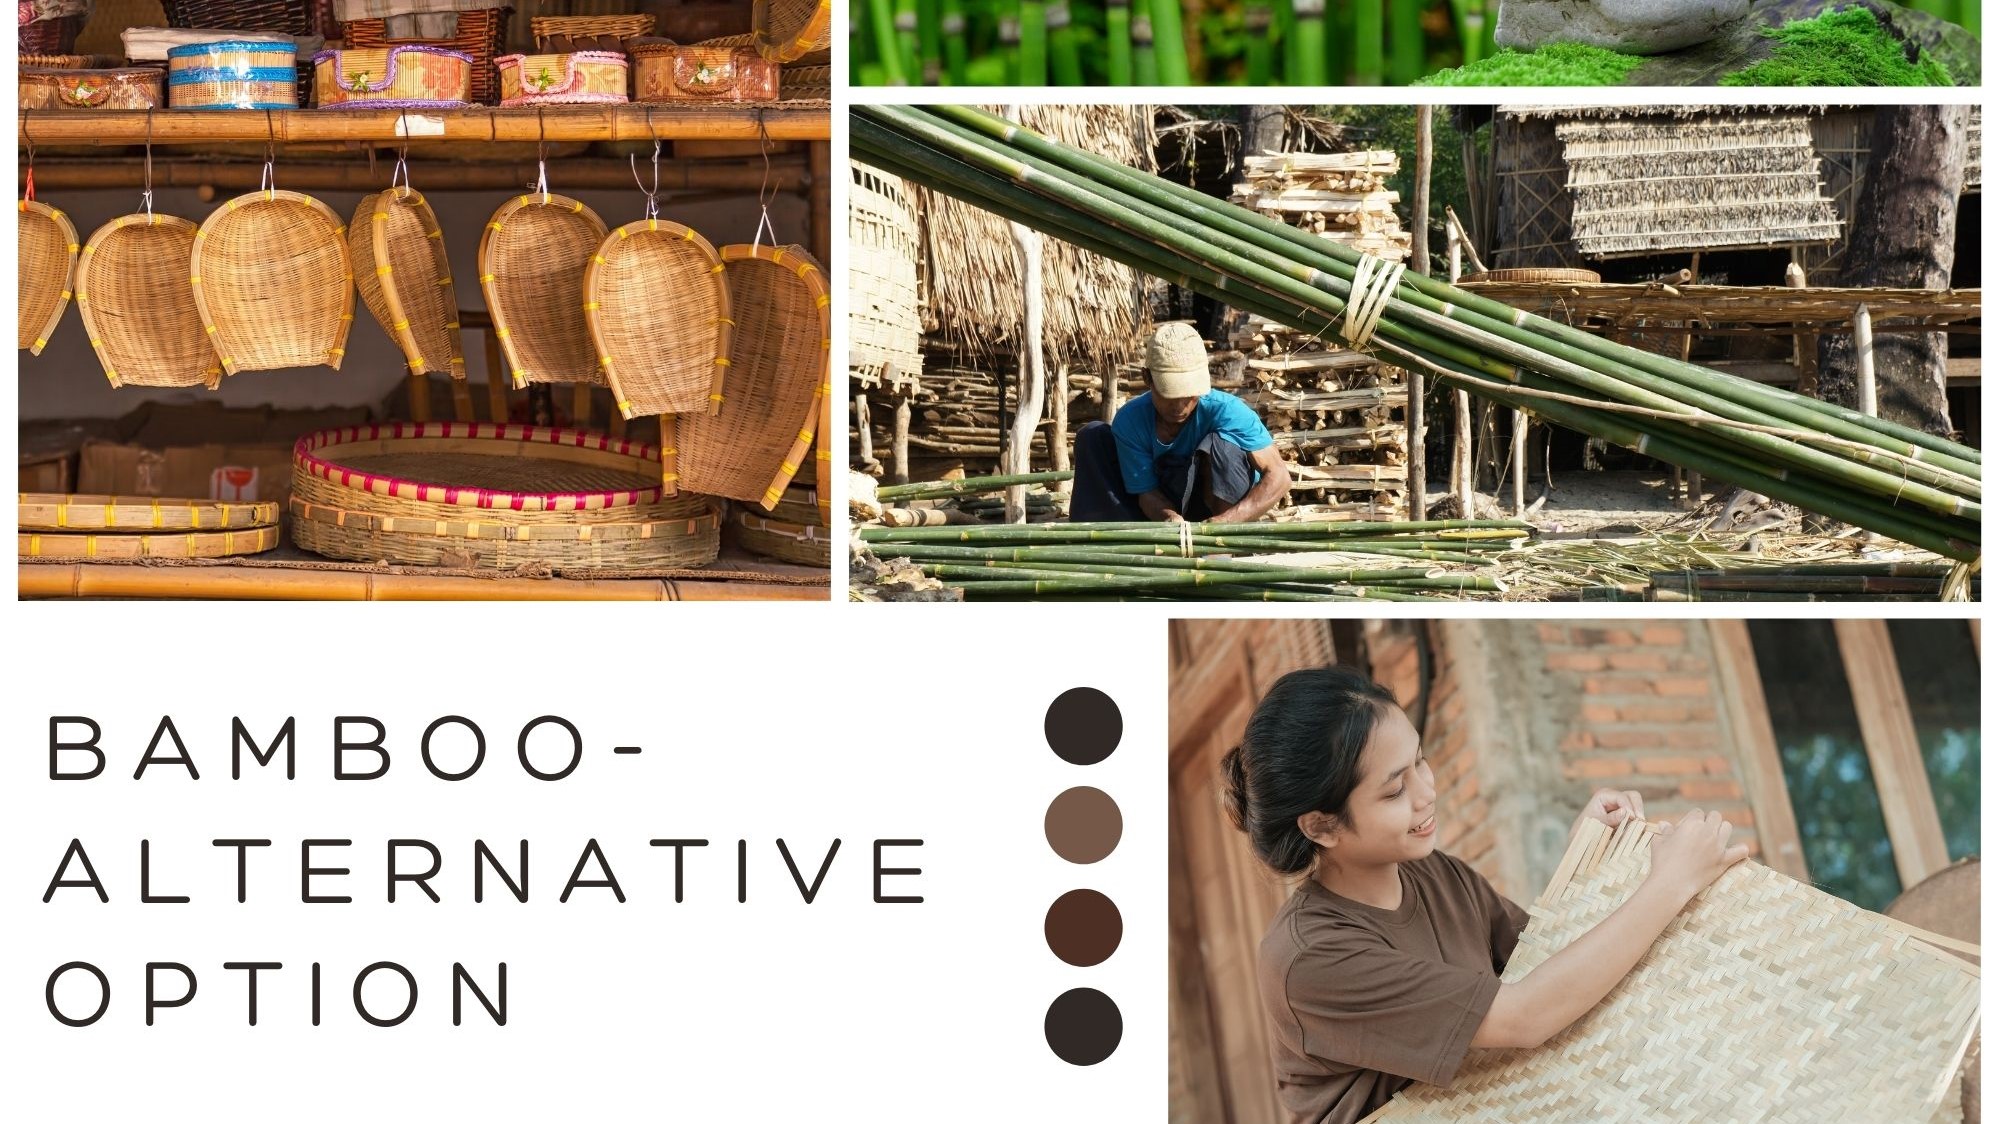 Use Natural Bamboo Products To Reduce Plastic - The Mixed Flavors